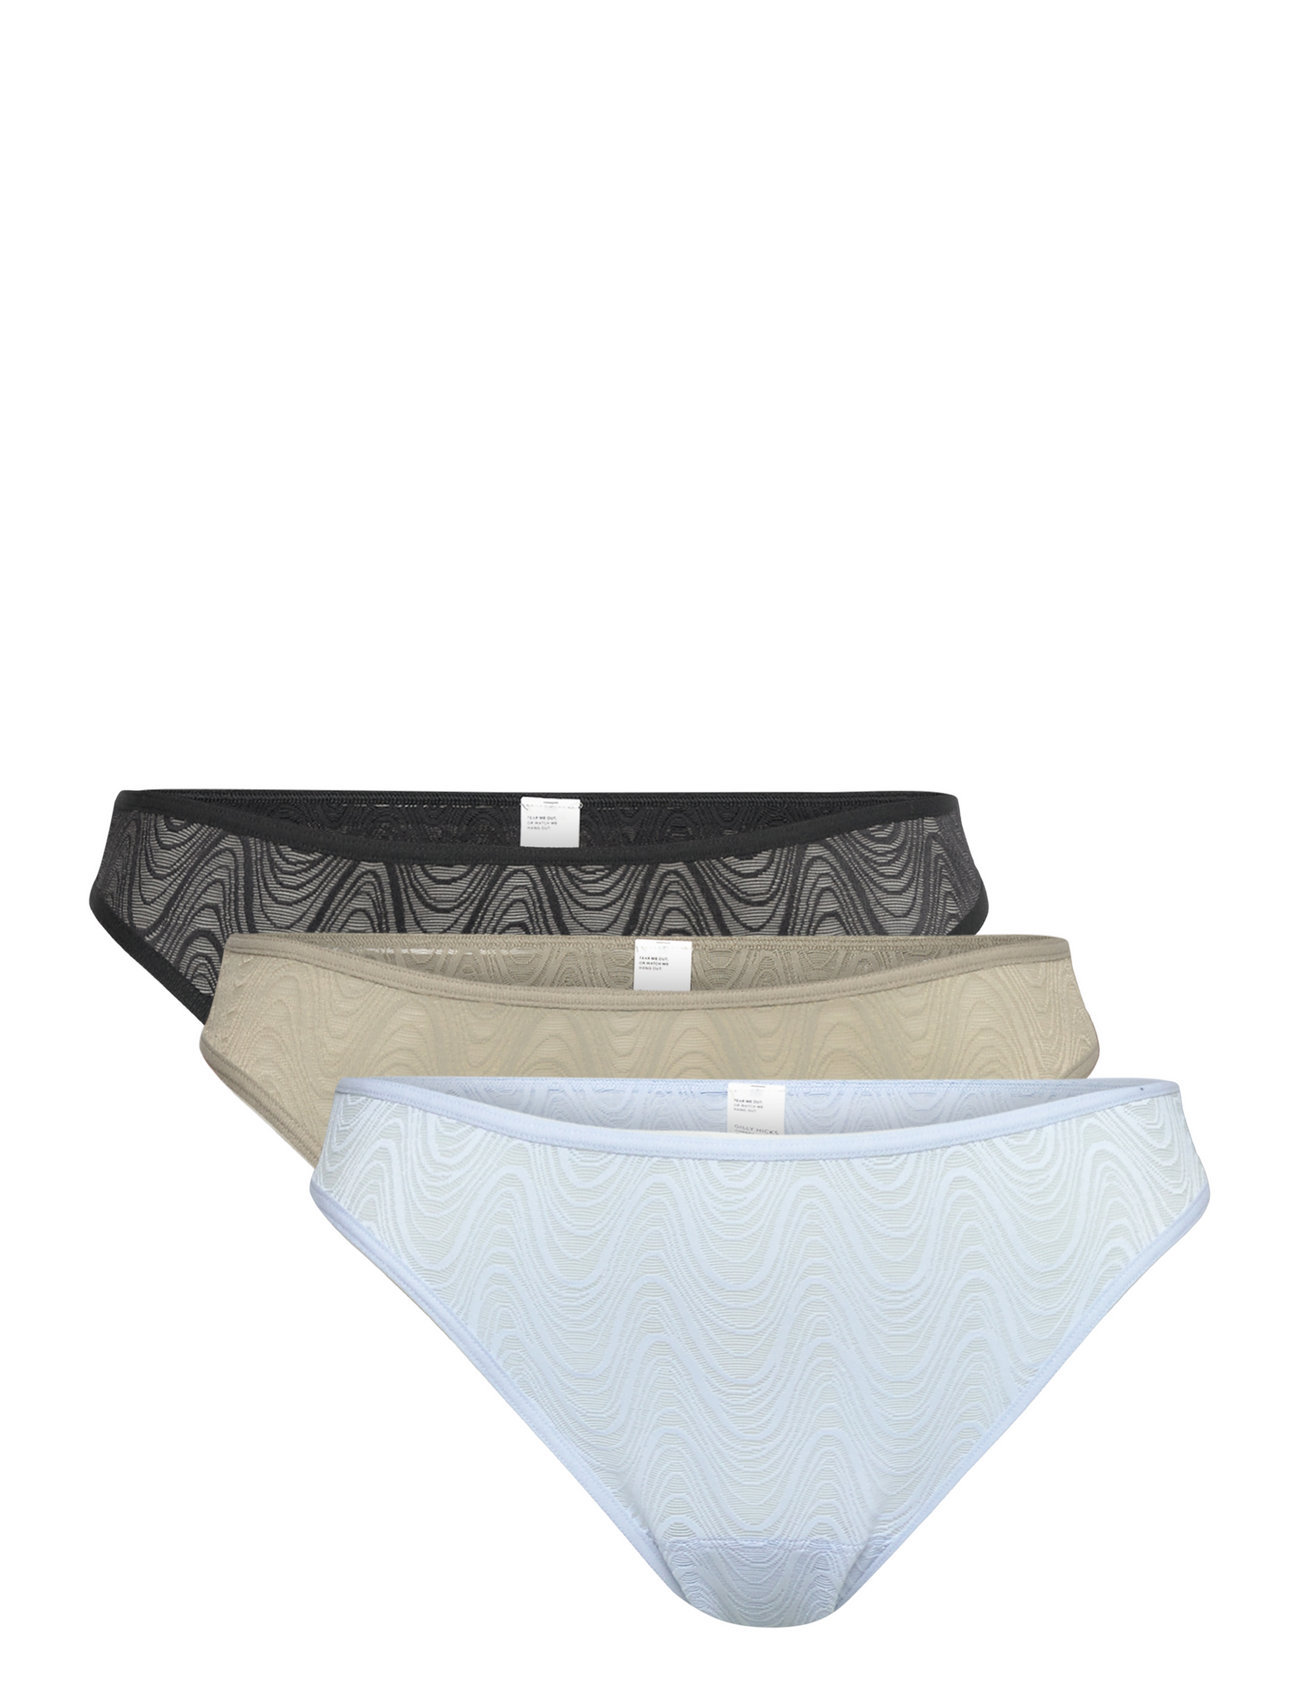 Gilly Hicks Gh Female Undies – panties – shop at Booztlet